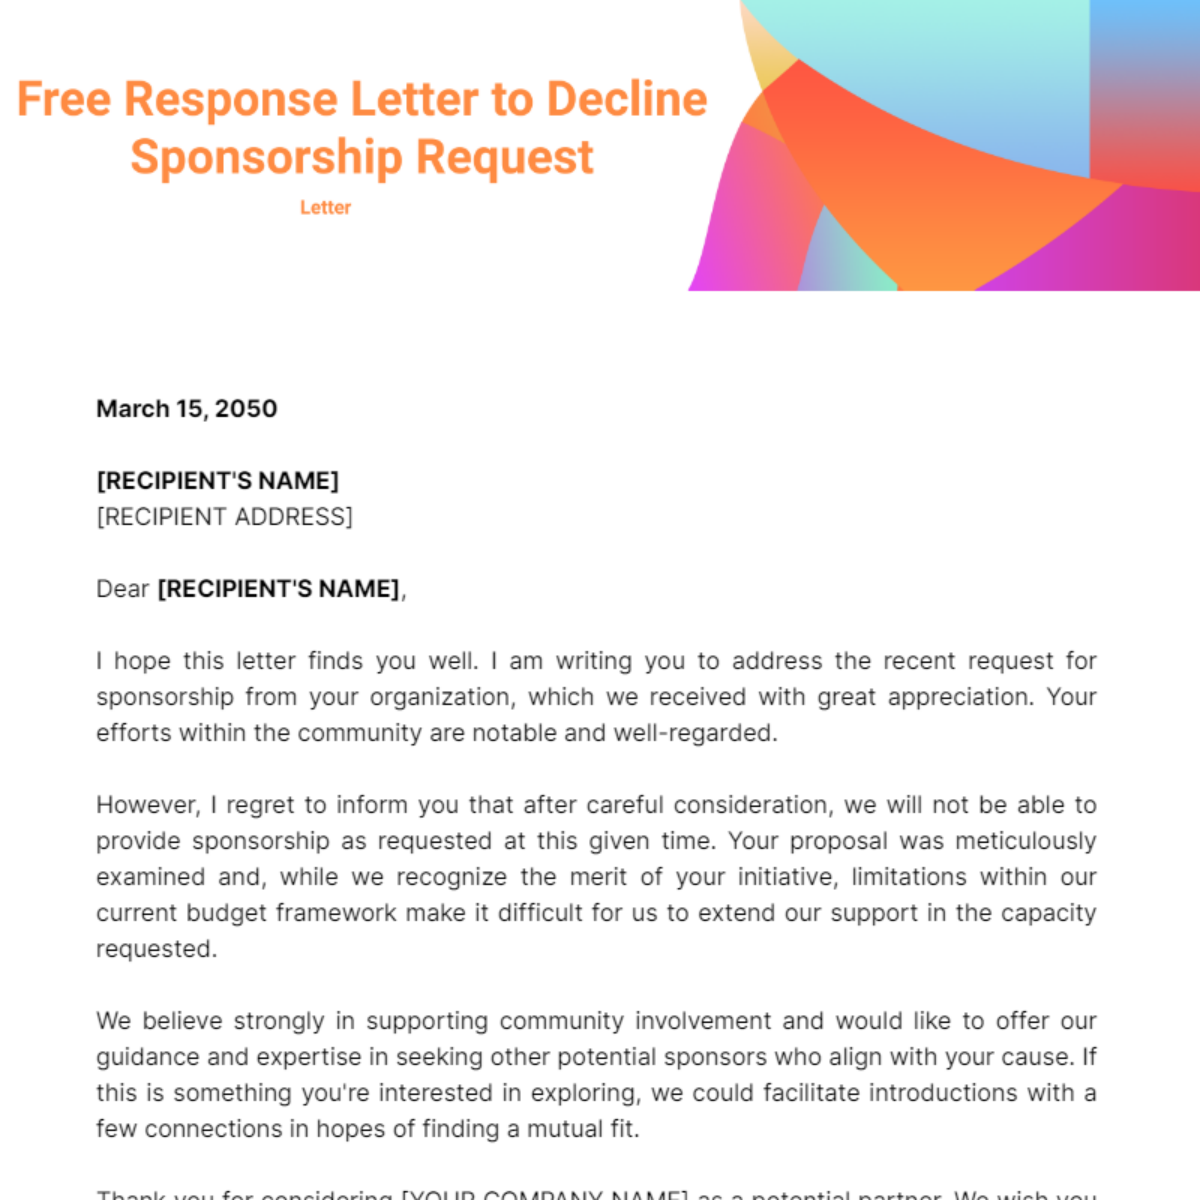 Free Response Letter to Decline Sponsorship Request